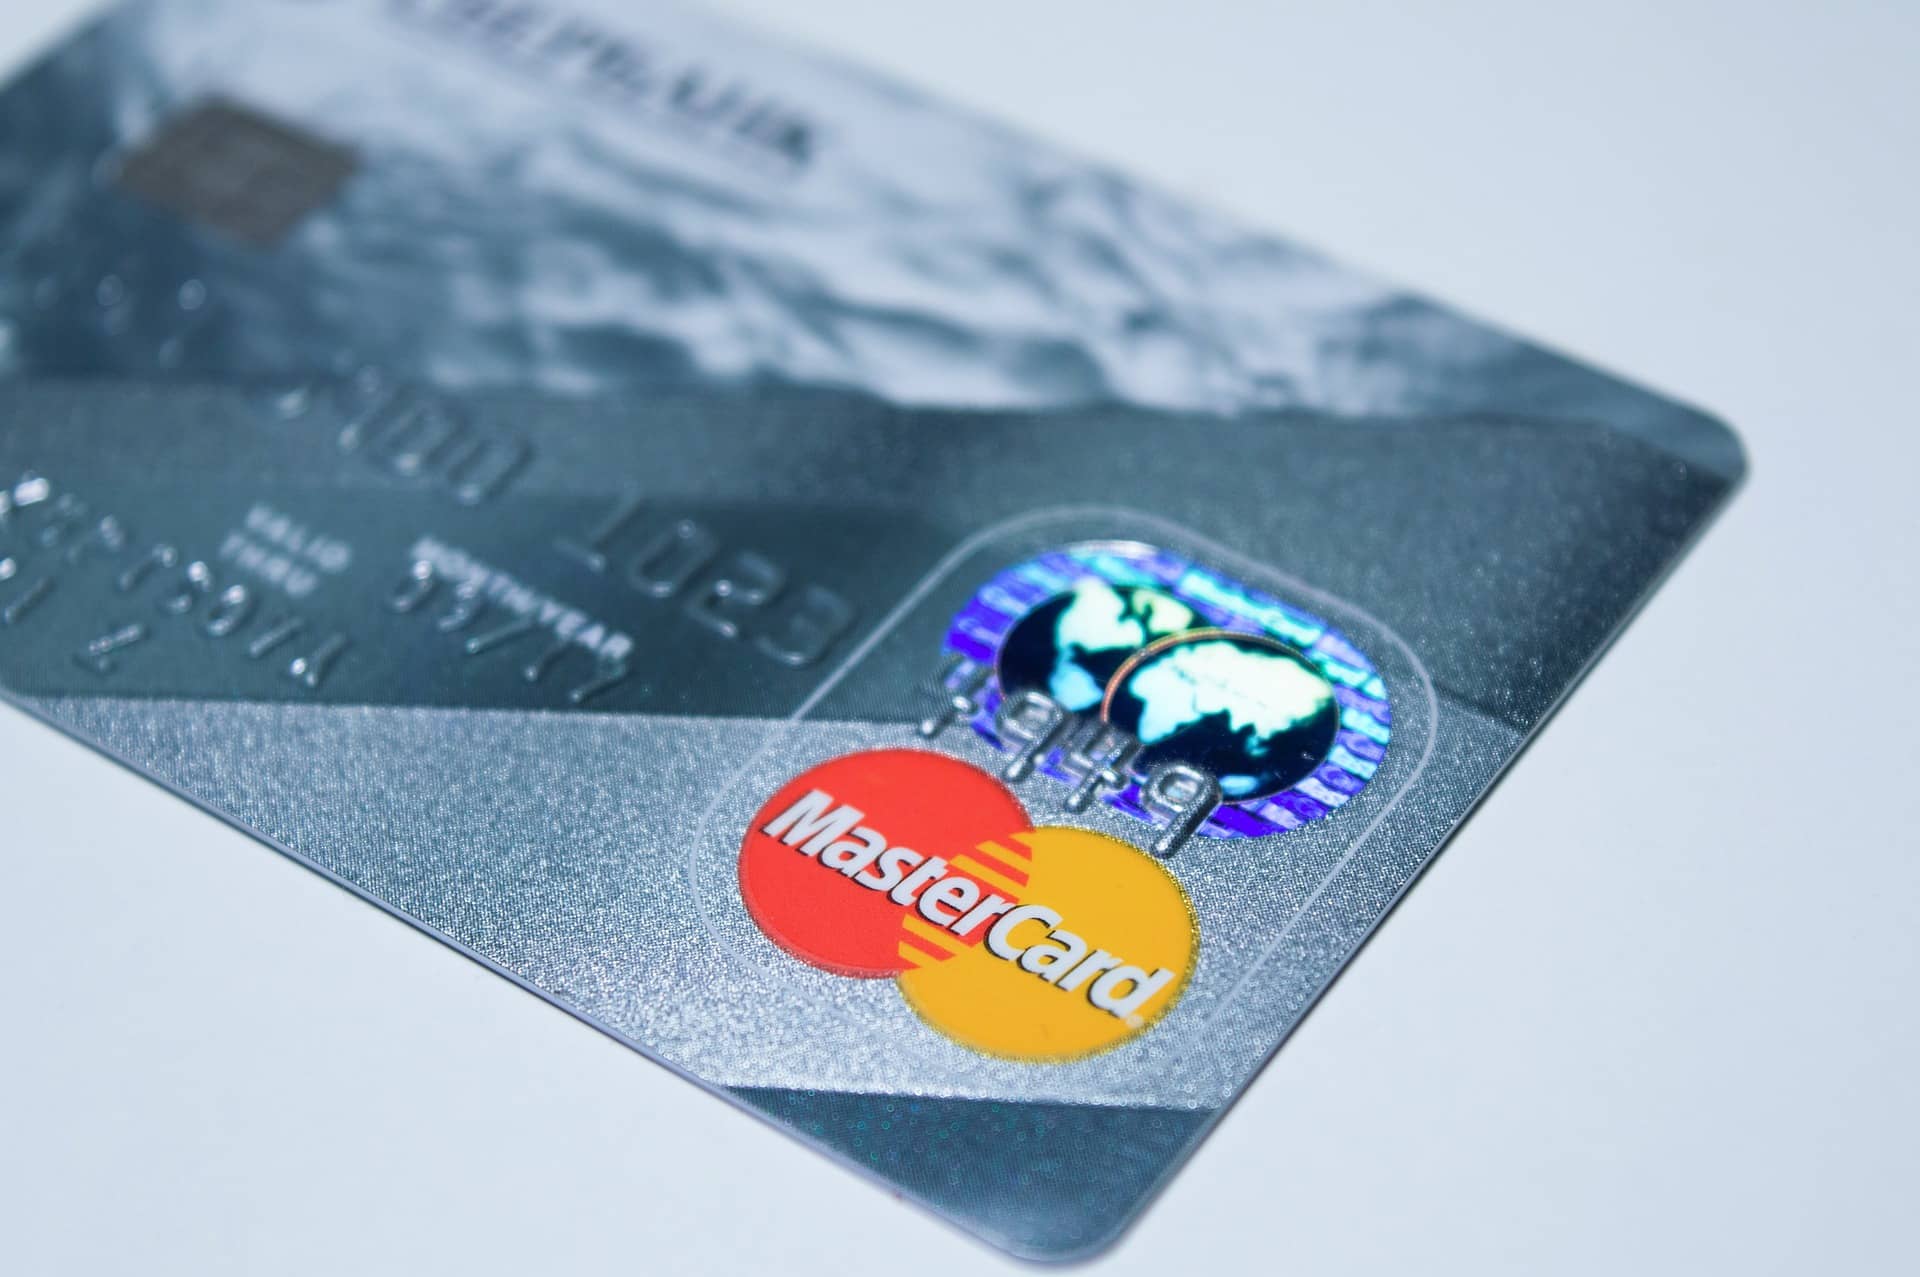 Mastercard Initiates To Make Cryptocurrencies An Everyday Payment Method